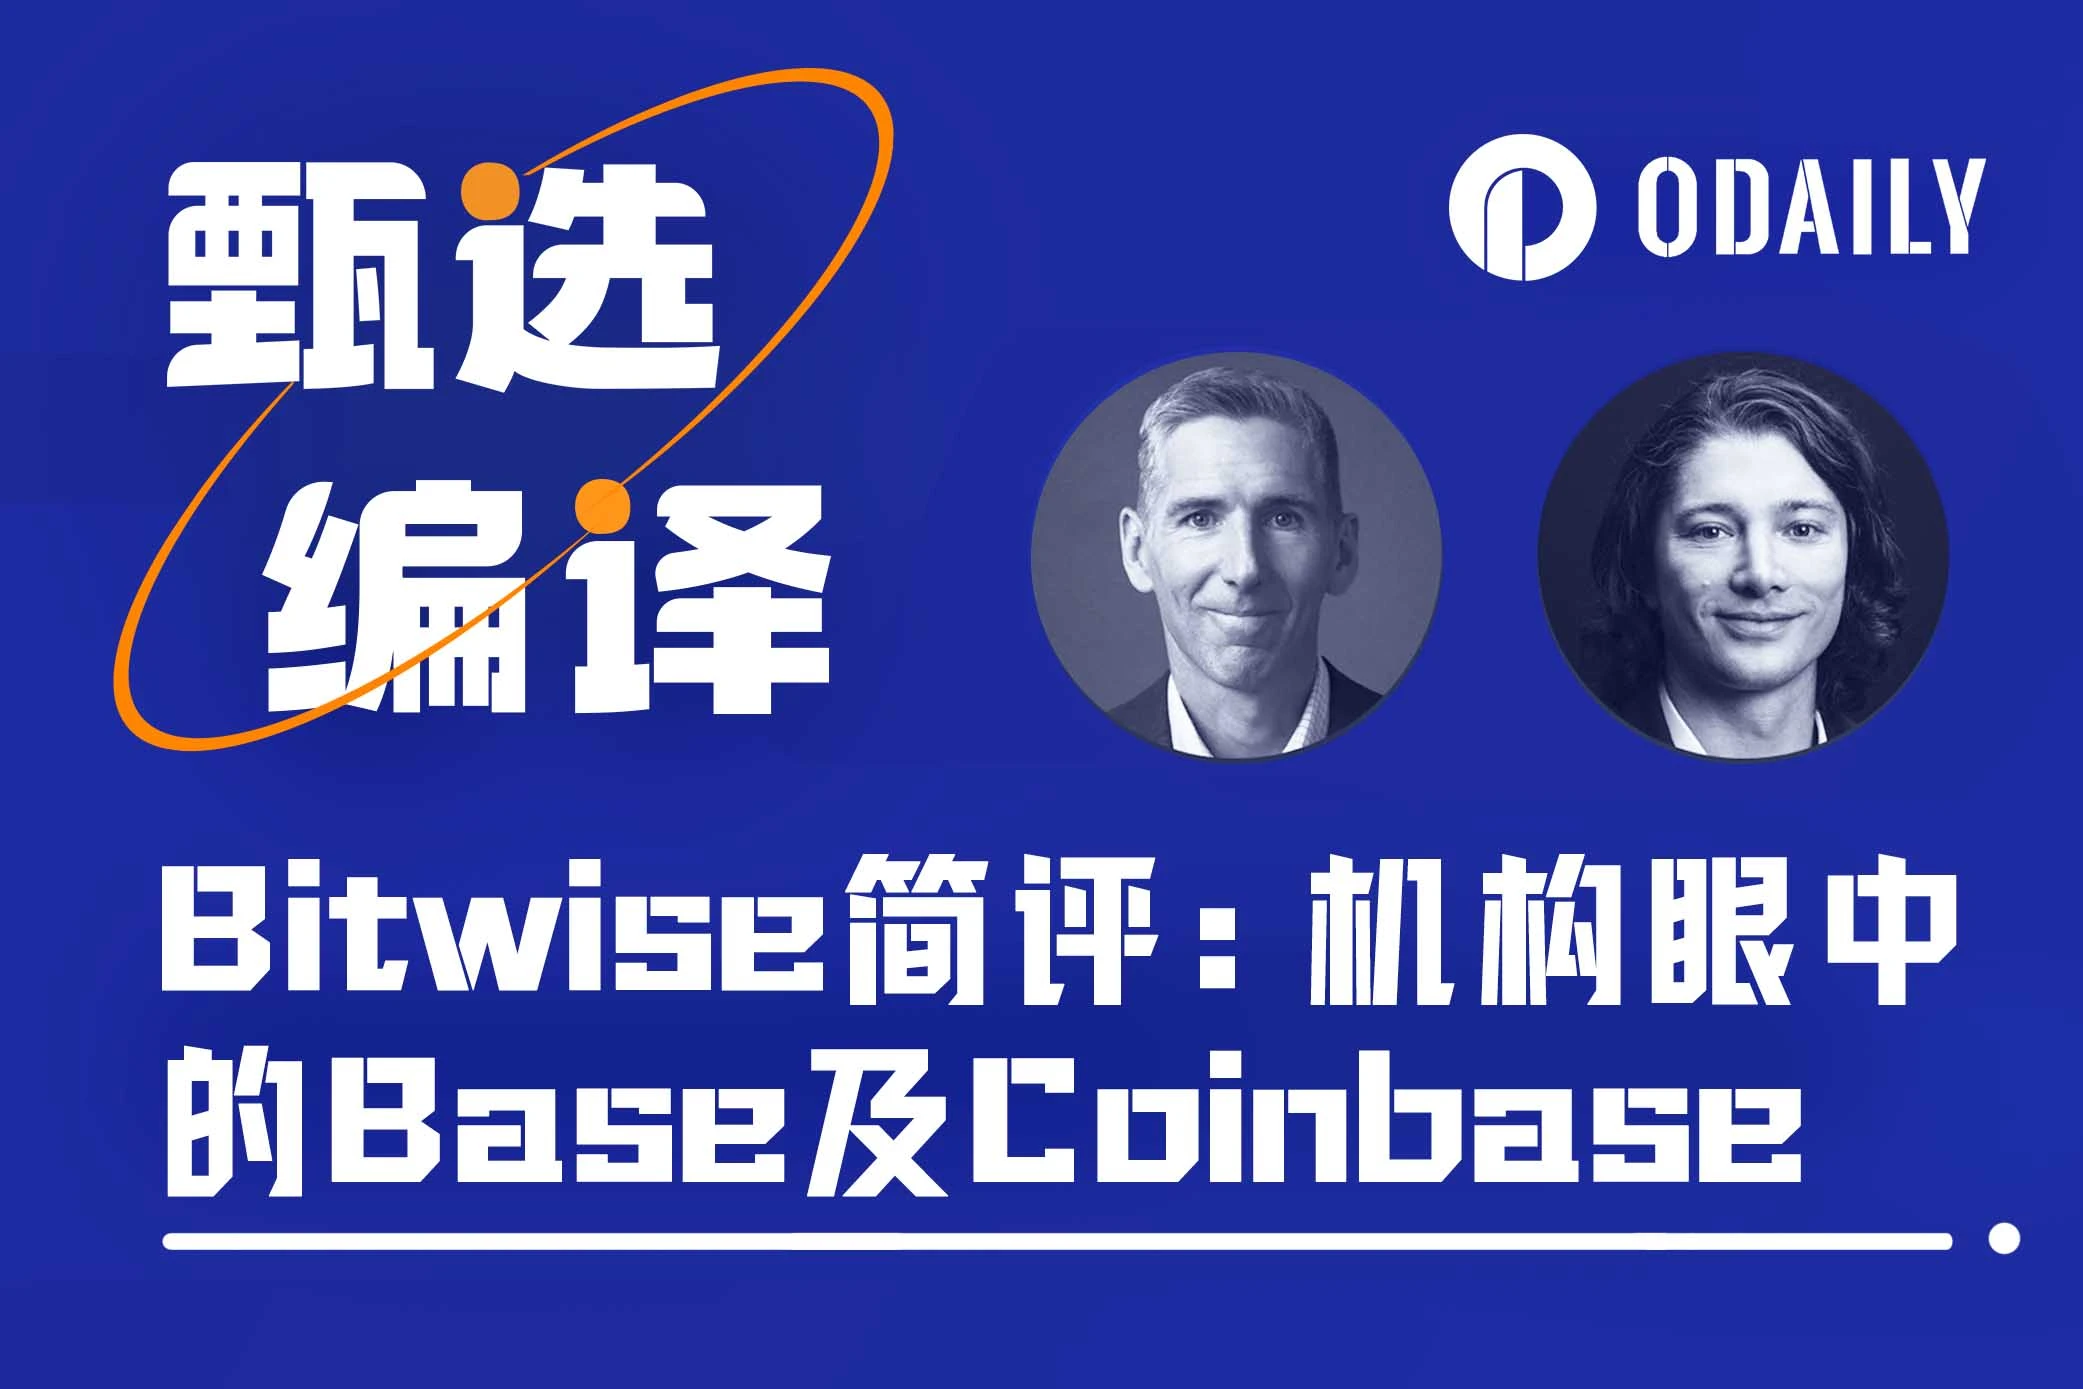 Institutional View: Why is Bitwise optimistic about Base and Coinbase?